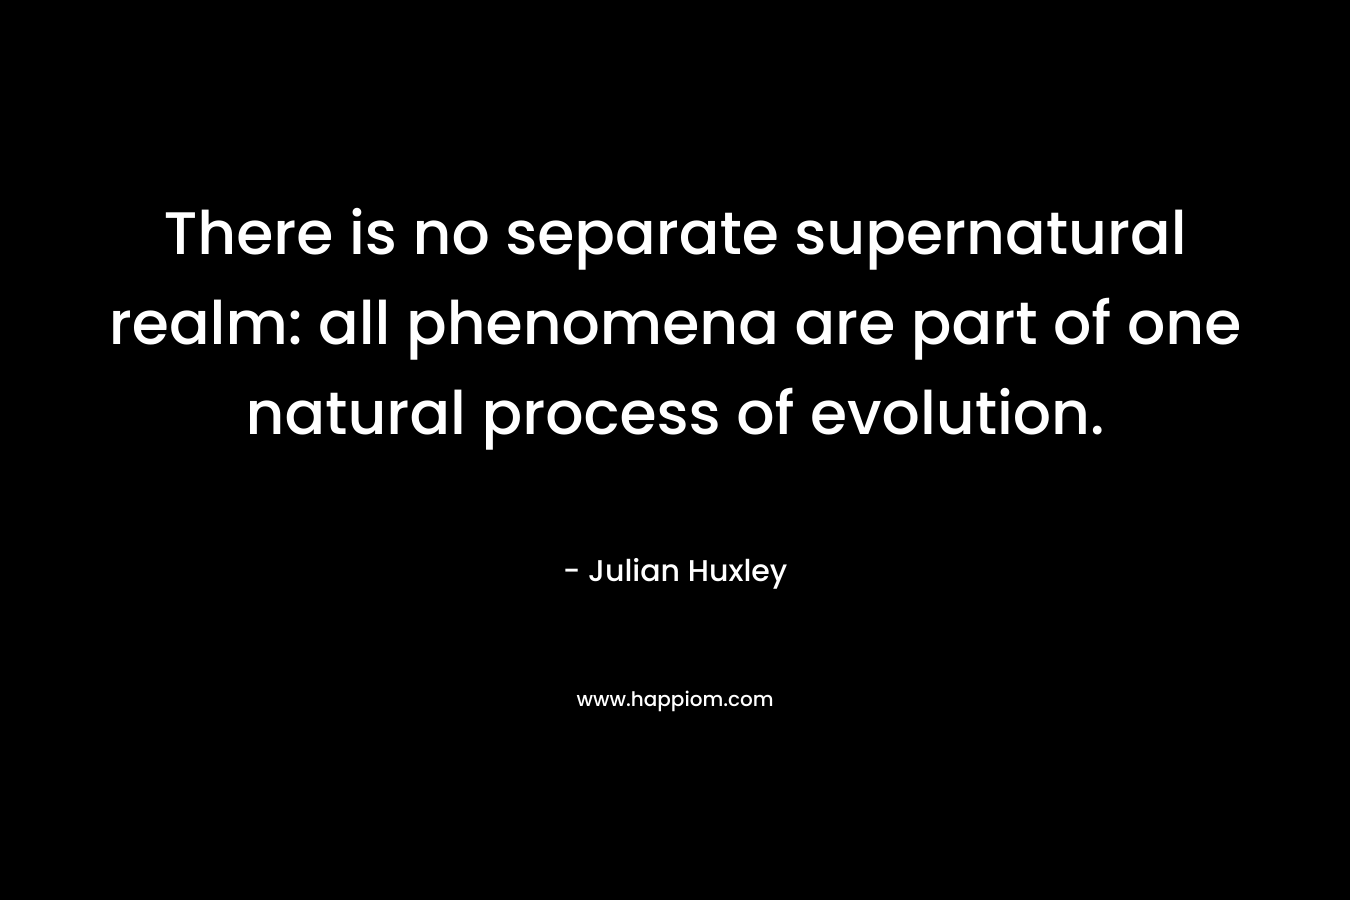 There is no separate supernatural realm: all phenomena are part of one natural process of evolution.